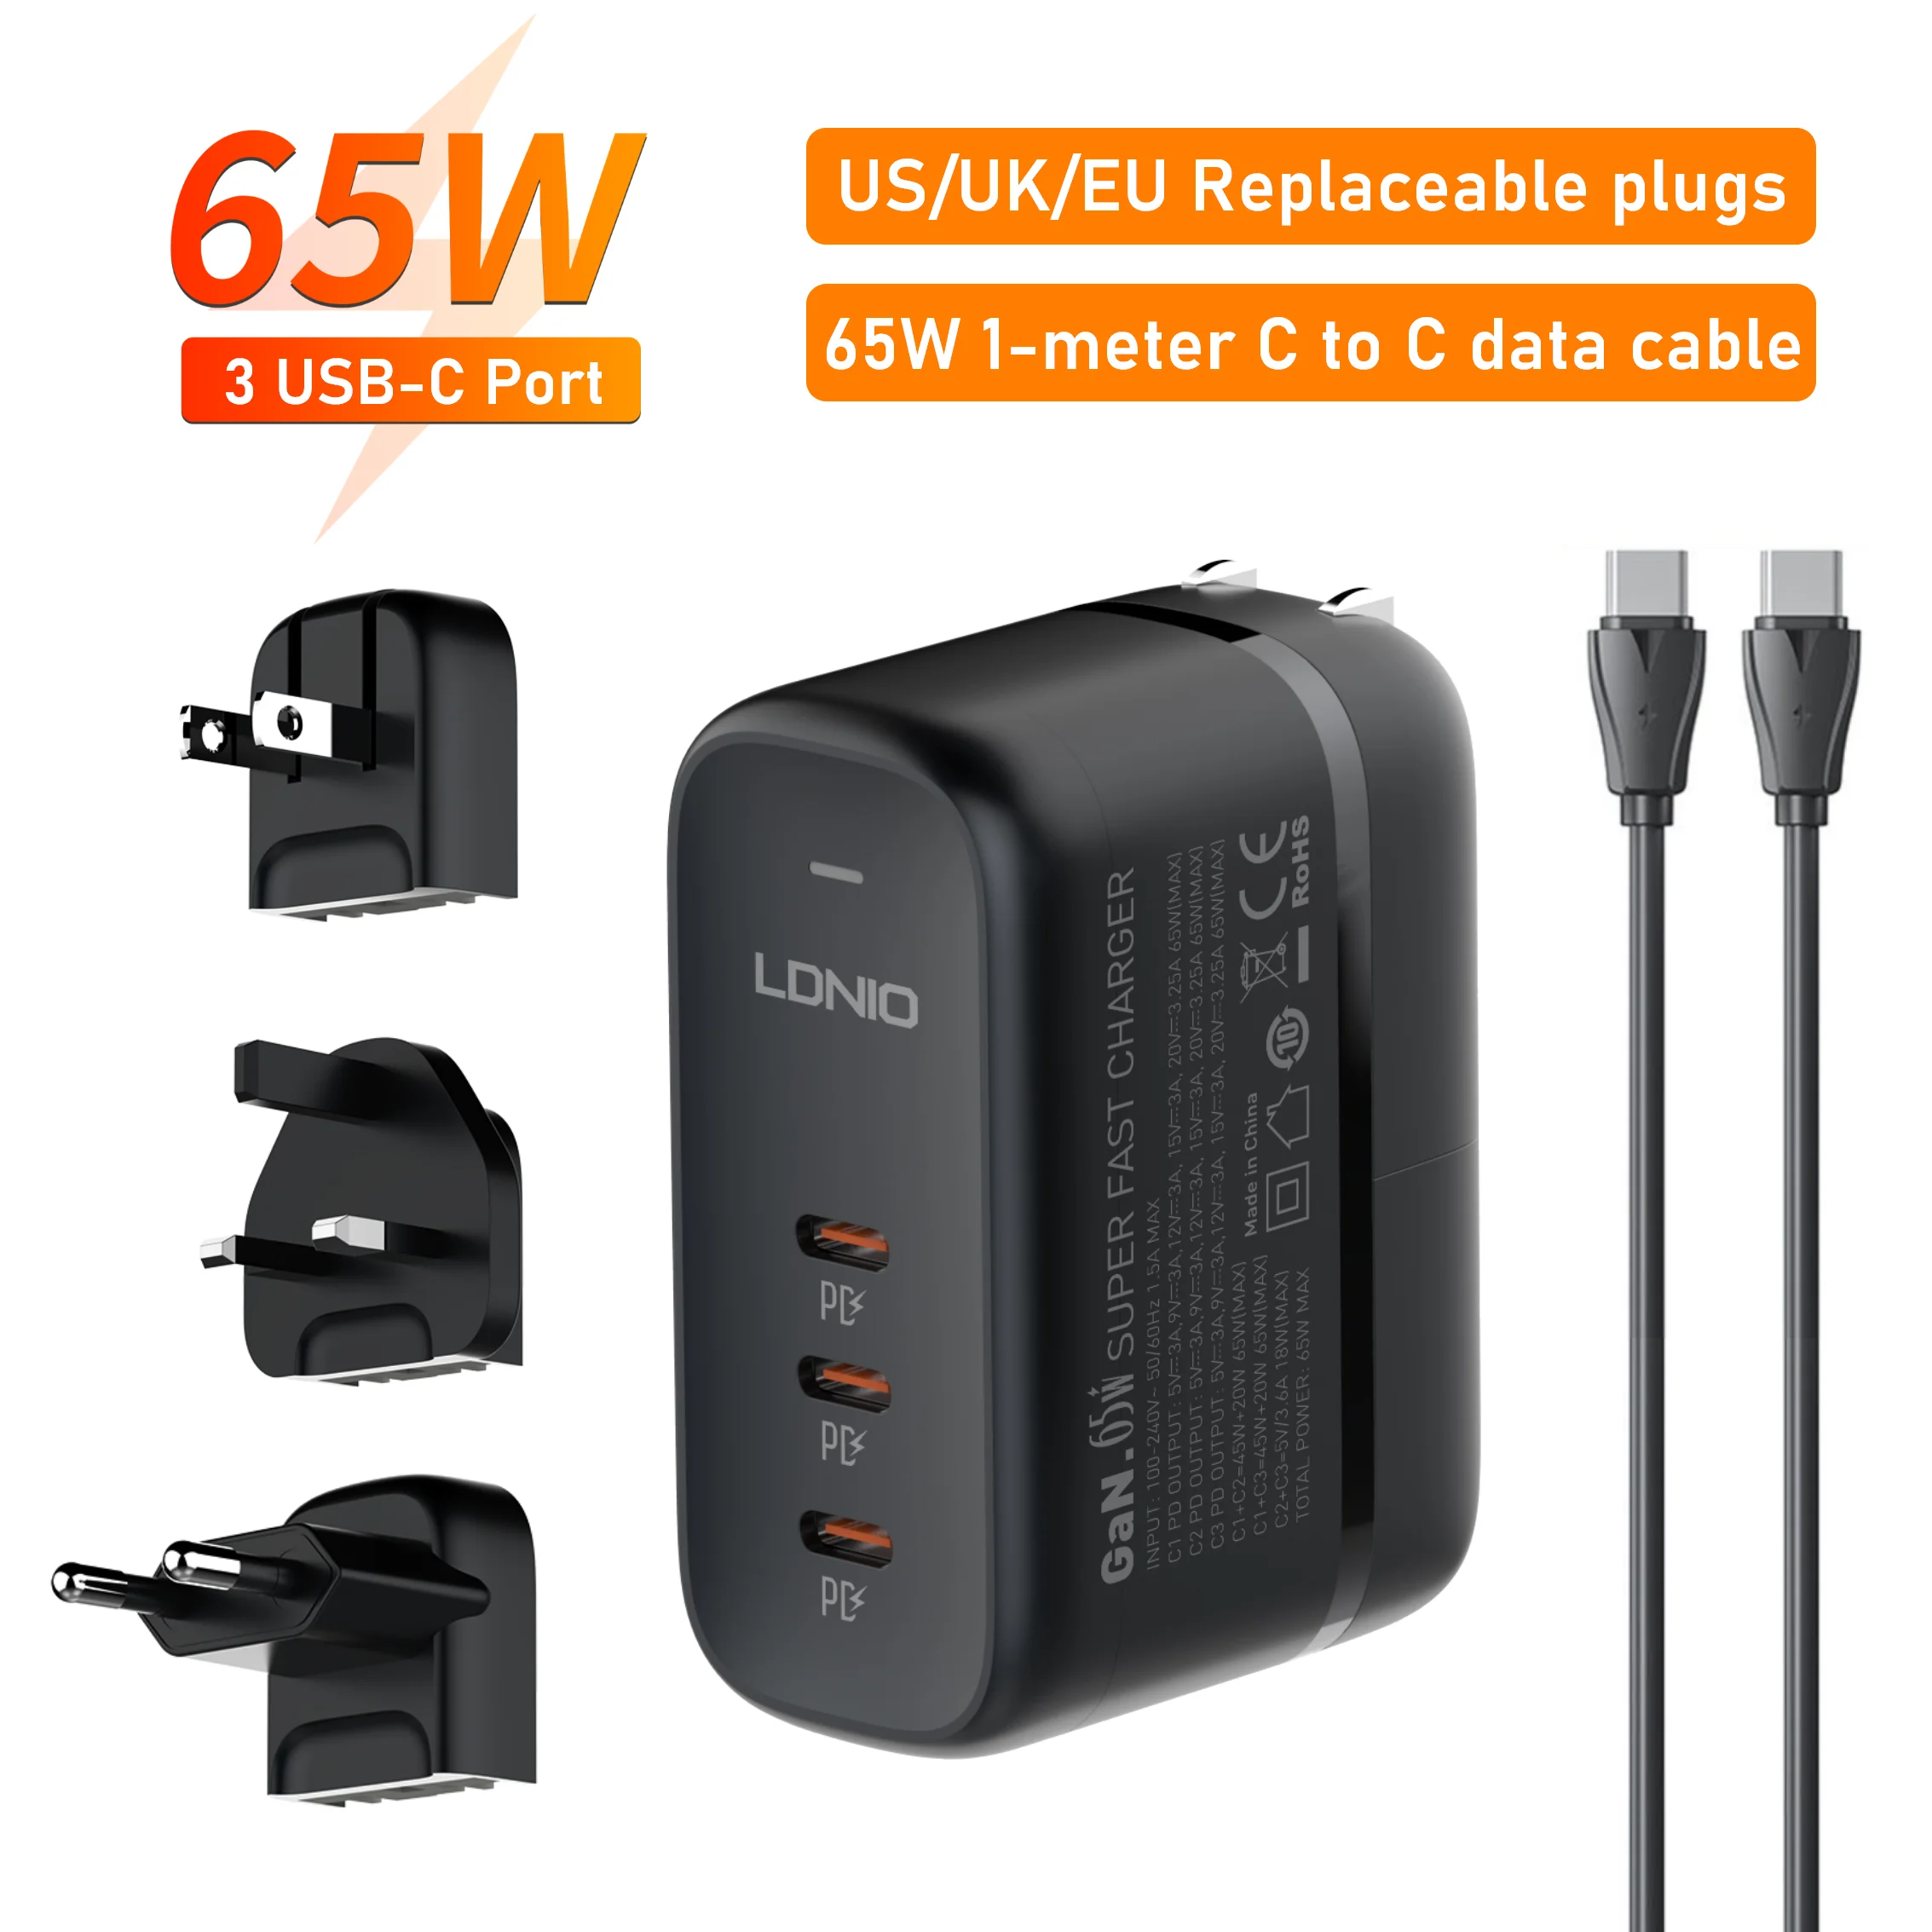 

LDNIO 65W USB C Power Charger 3 Port GaN PPS Wall Charger Fast Compact Foldable with US/UK/EU Plugs for Travel，for MacBook Pro